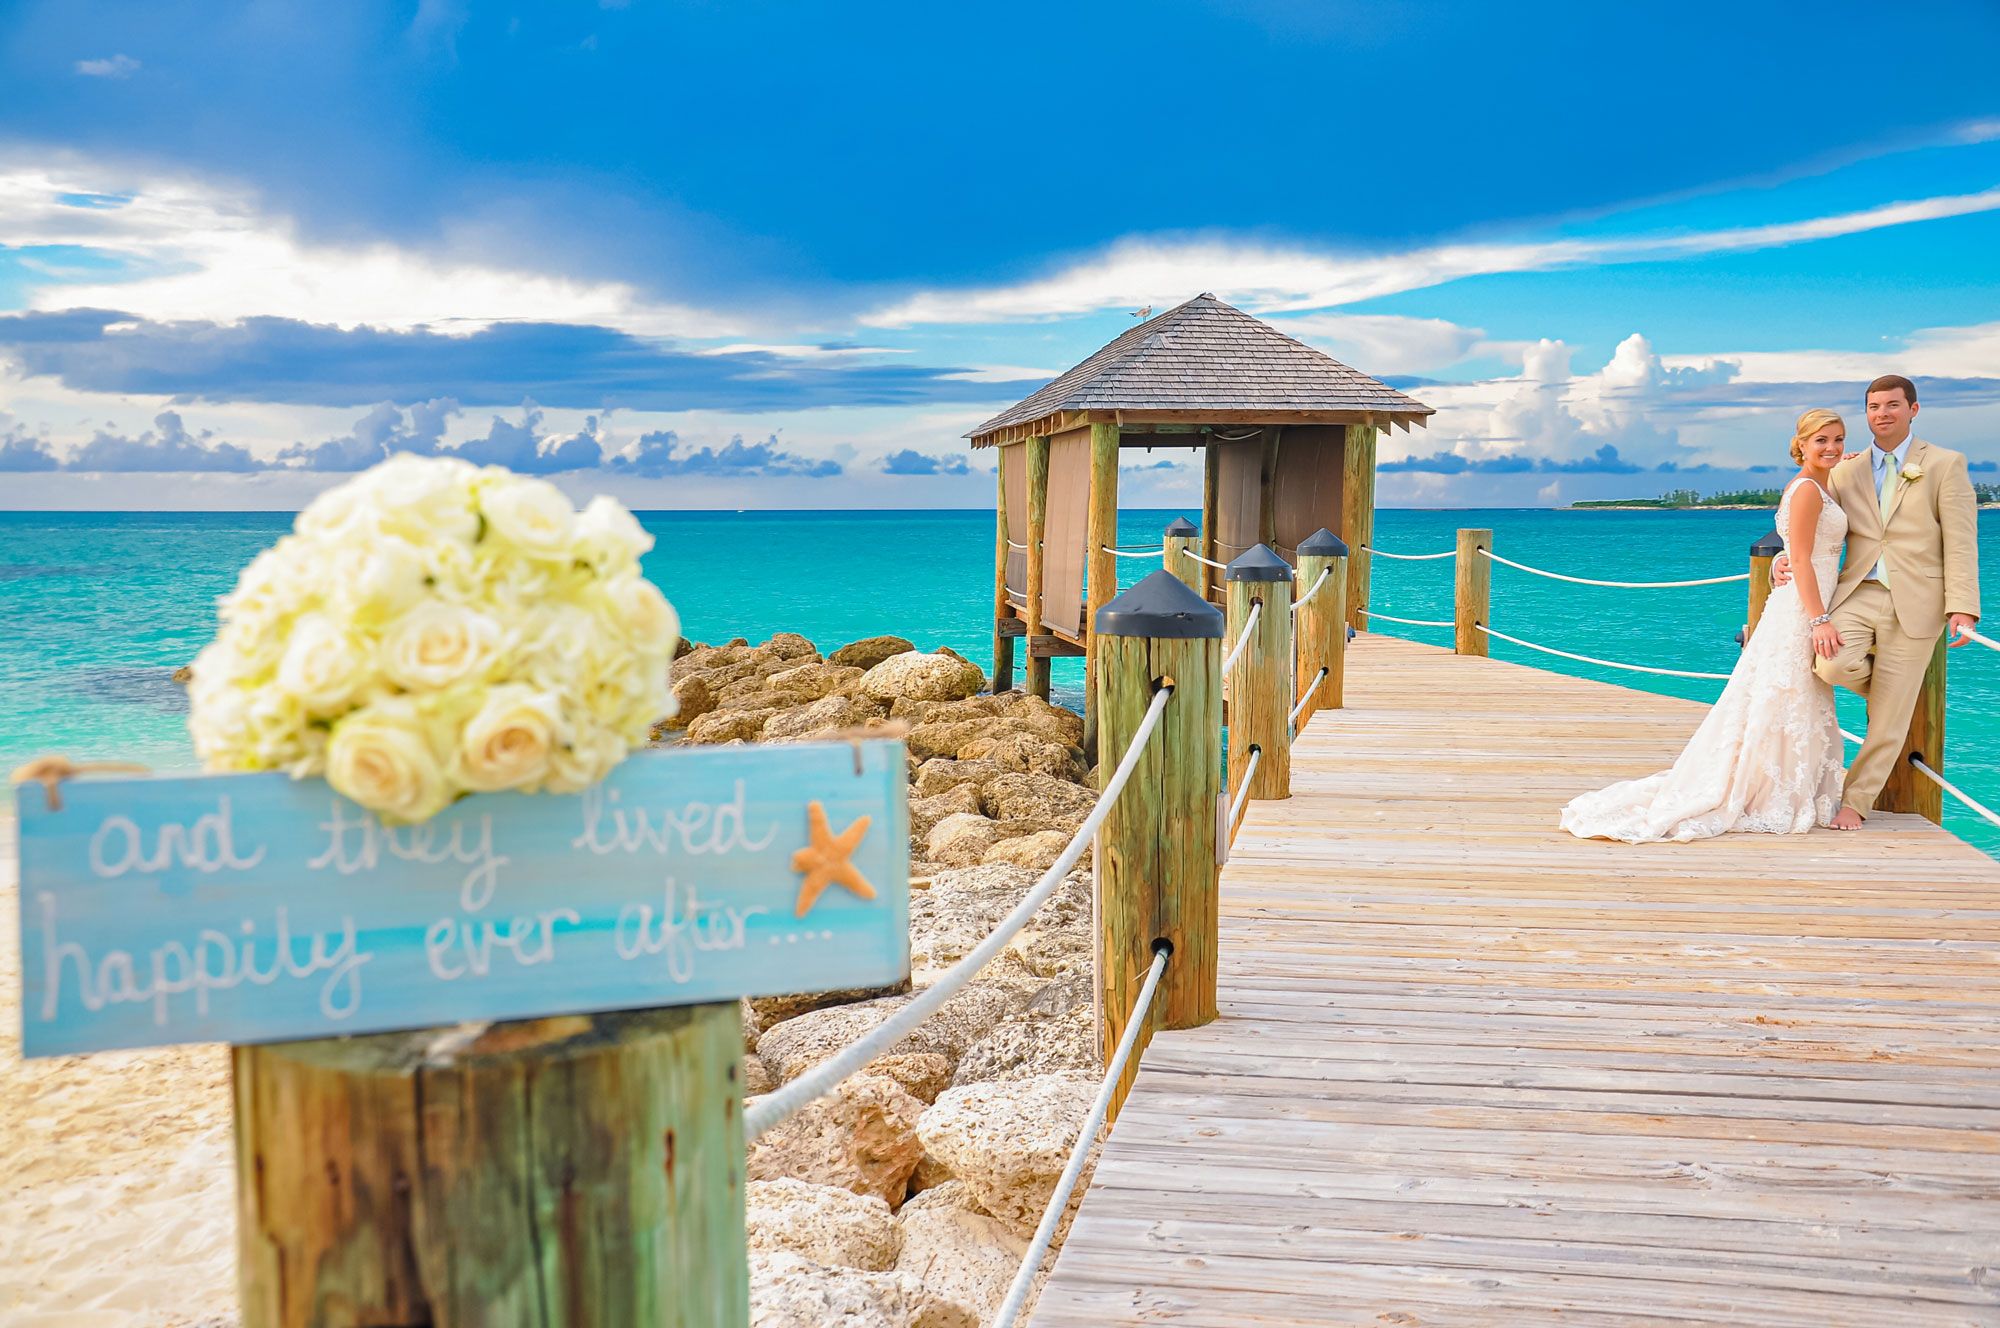 Beach-Wedding-Detail-Happily-Ever-After-Sign-Couple---6-1